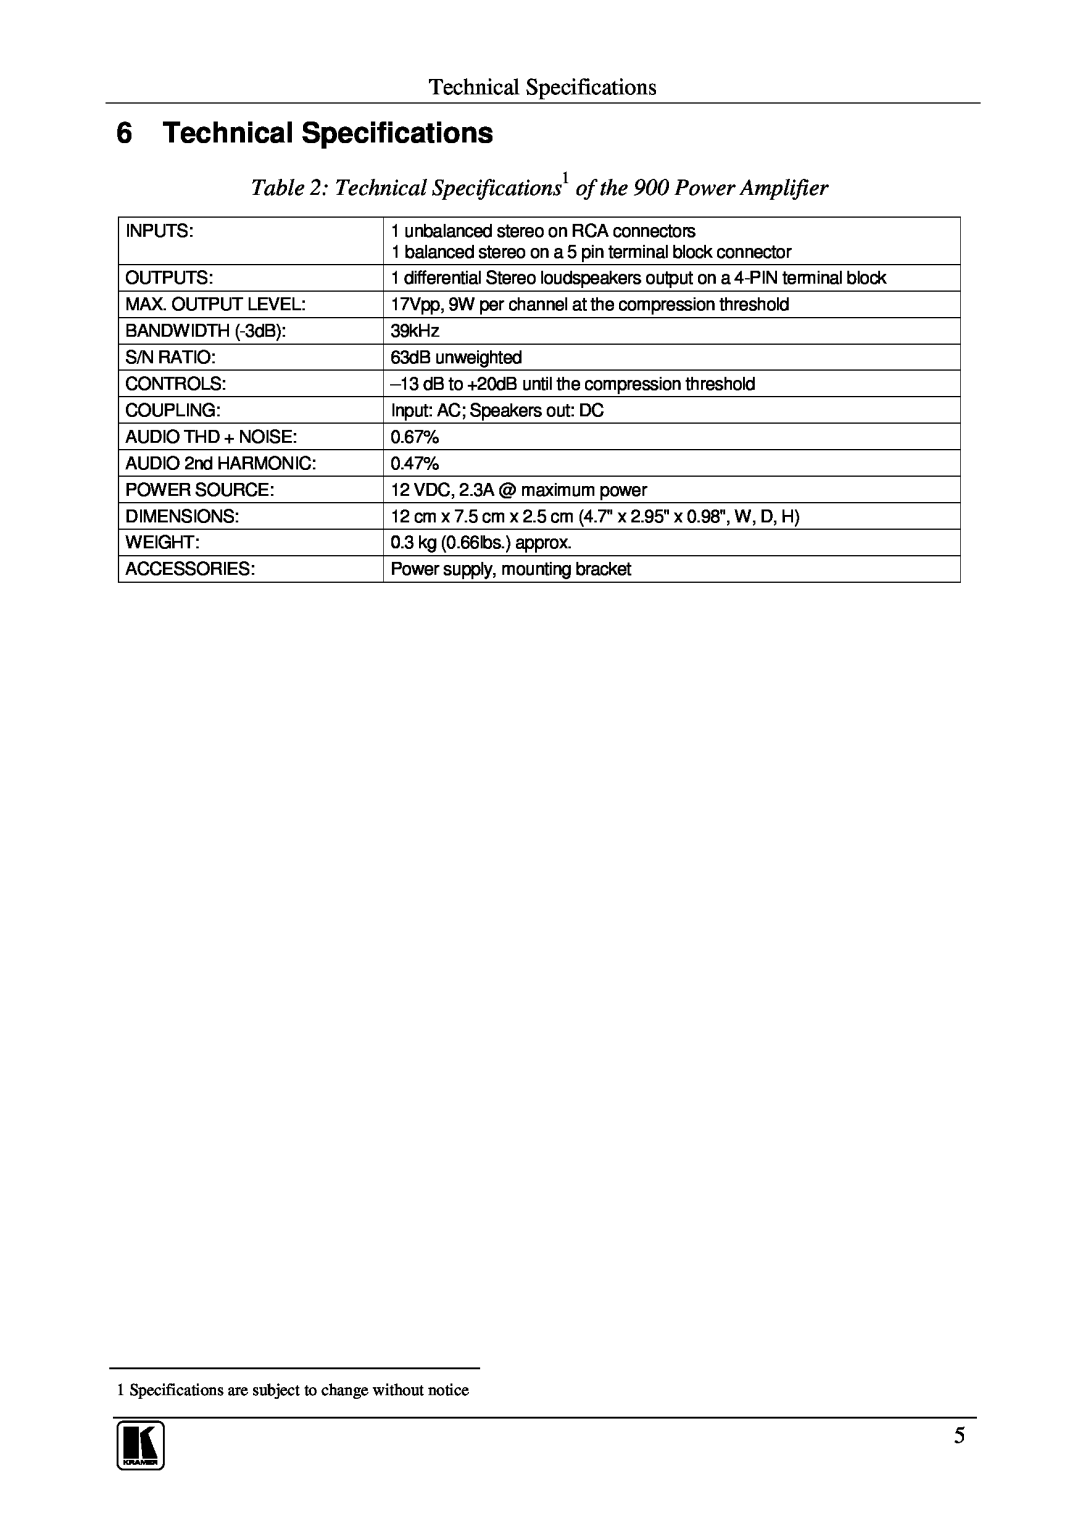 Kramer Electronics 900 user manual Technical Specifications 